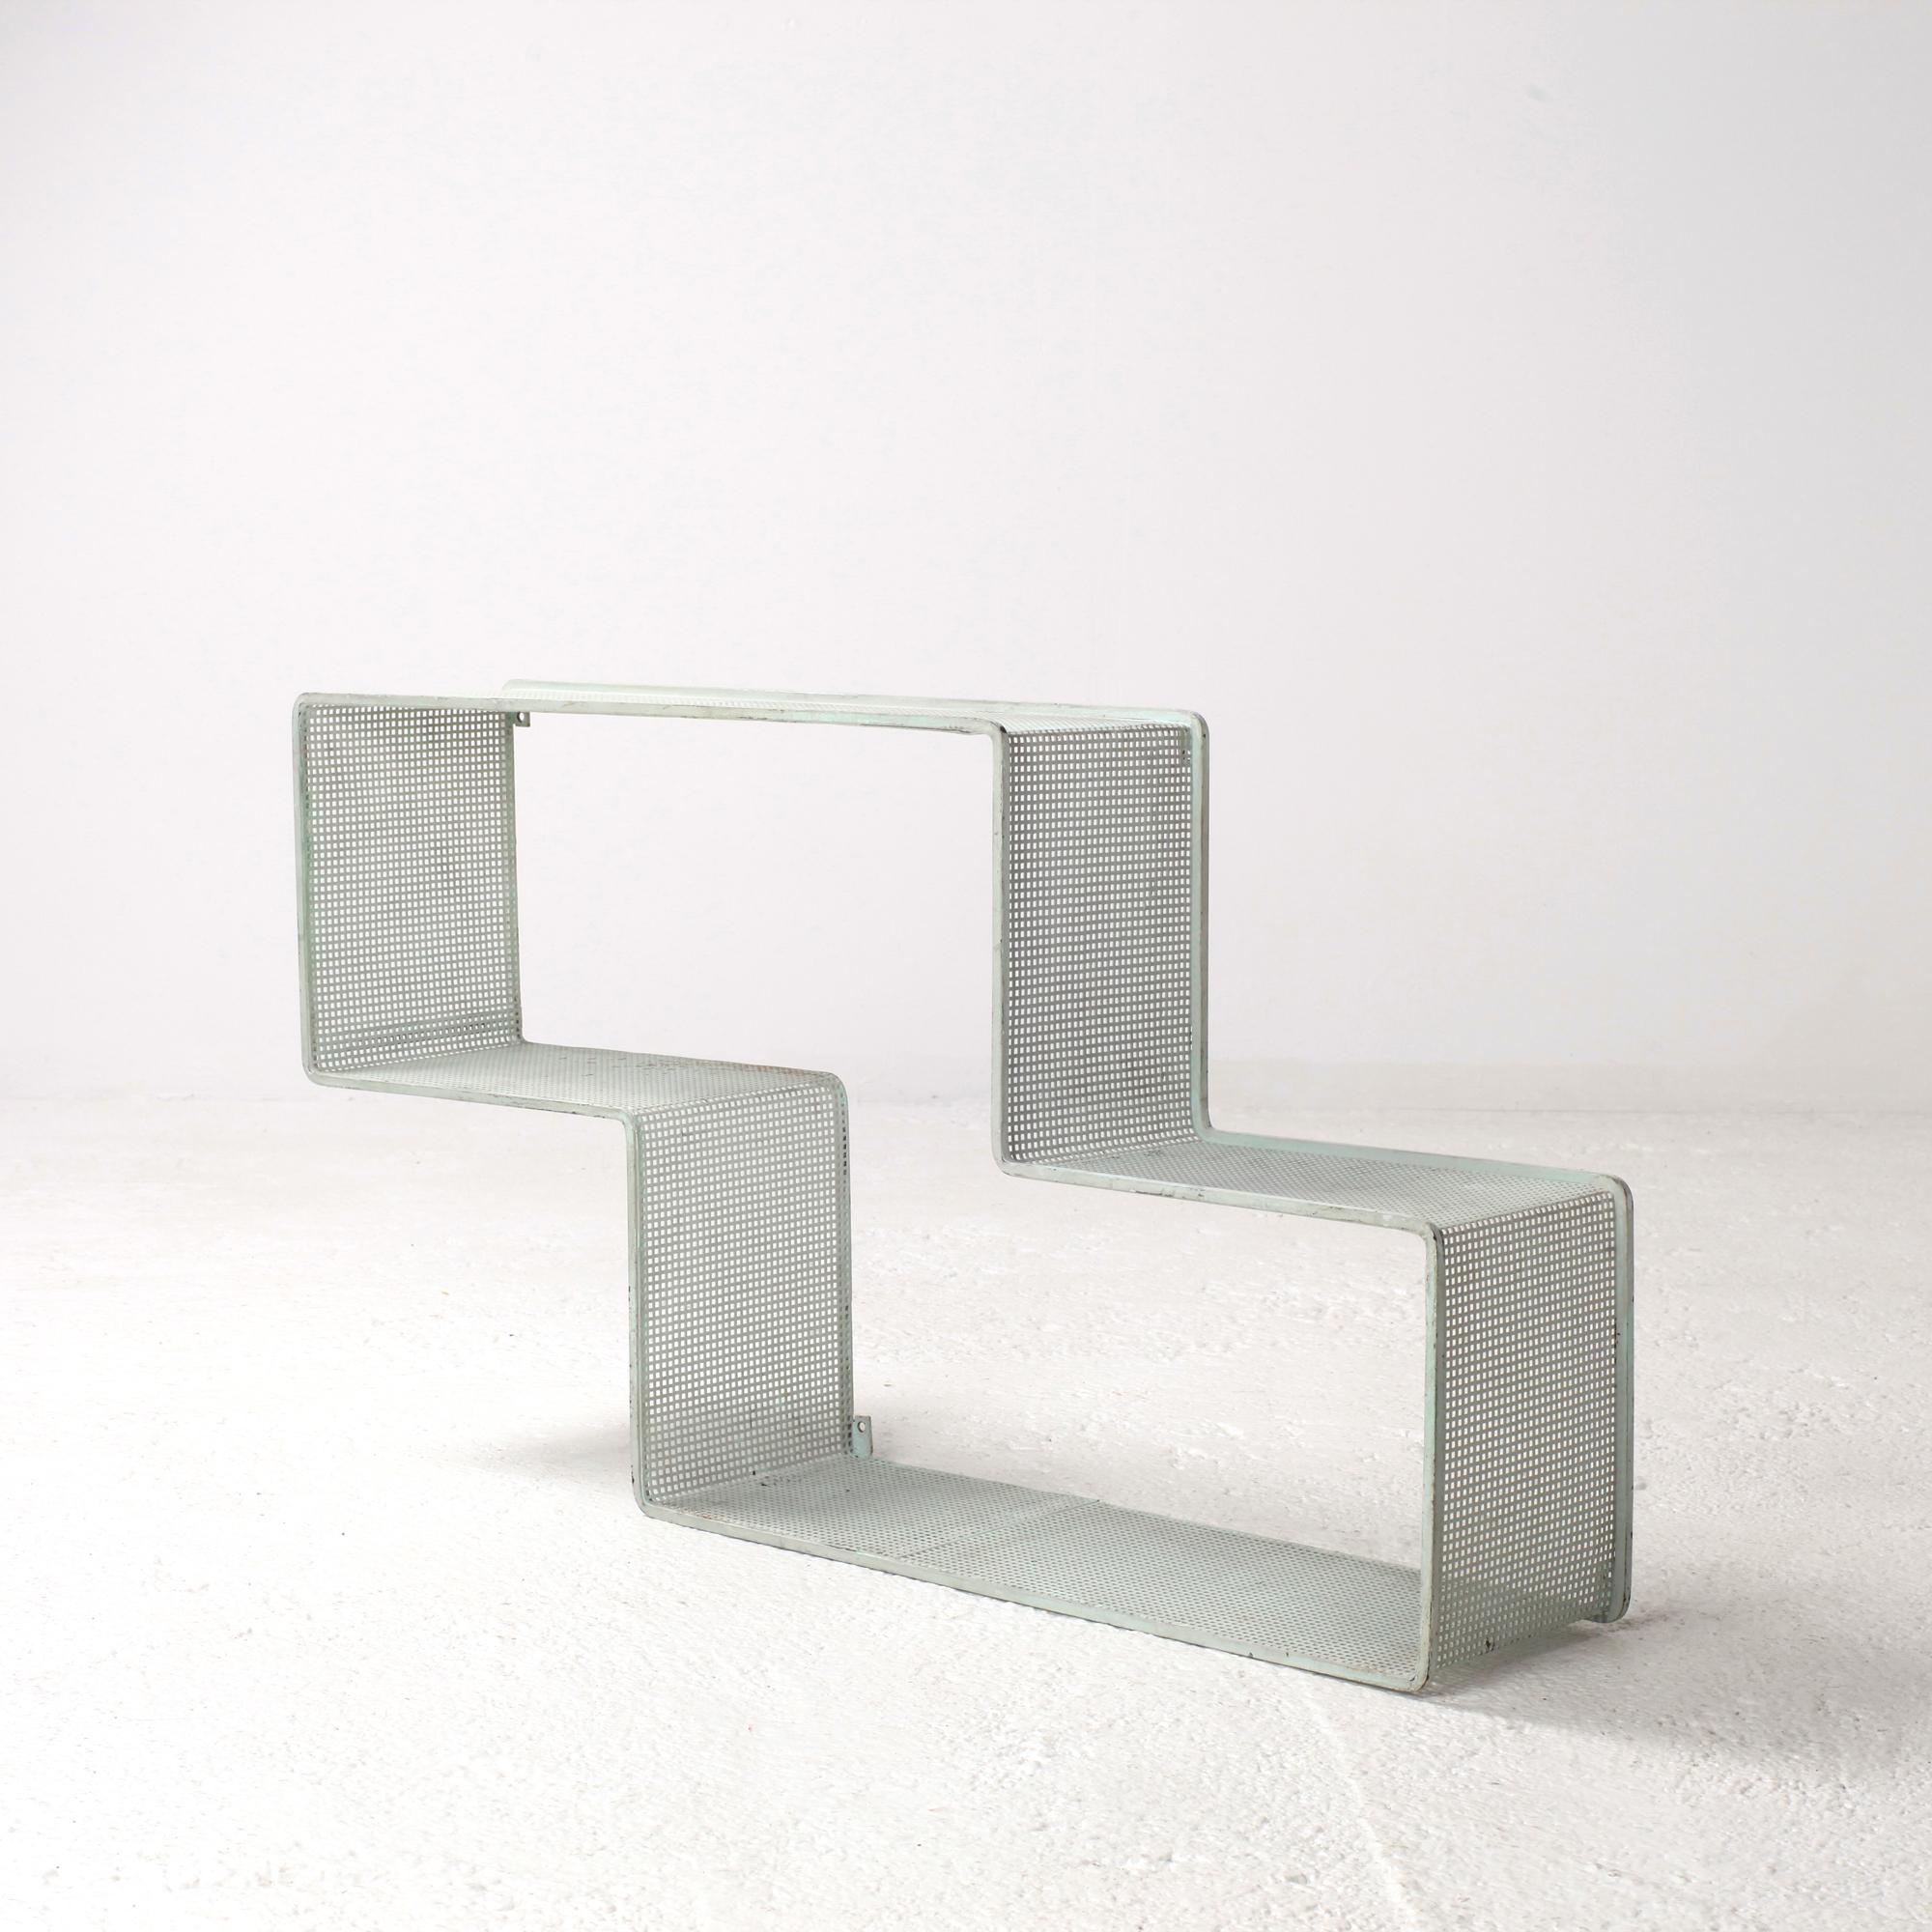 French Dedal Wall Shelf by Mathieu Mategot, Perforated Steel, circa 1950, France